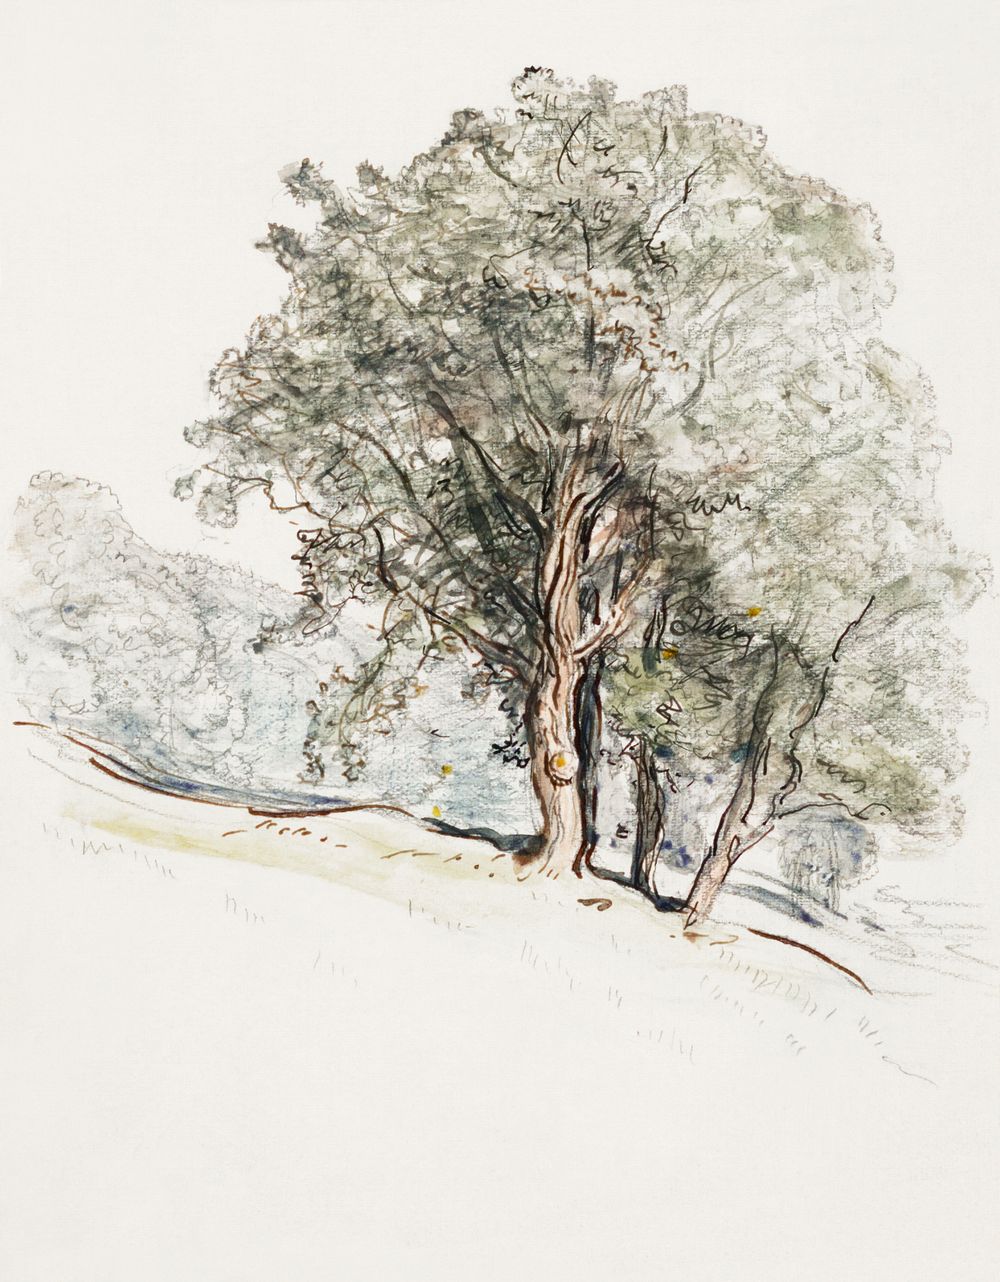 Study of Oak Trees at Lake Dunmore, Vermont (August 23, 1917) by Samuel Colman. Original from The Smithsonian Institution.…